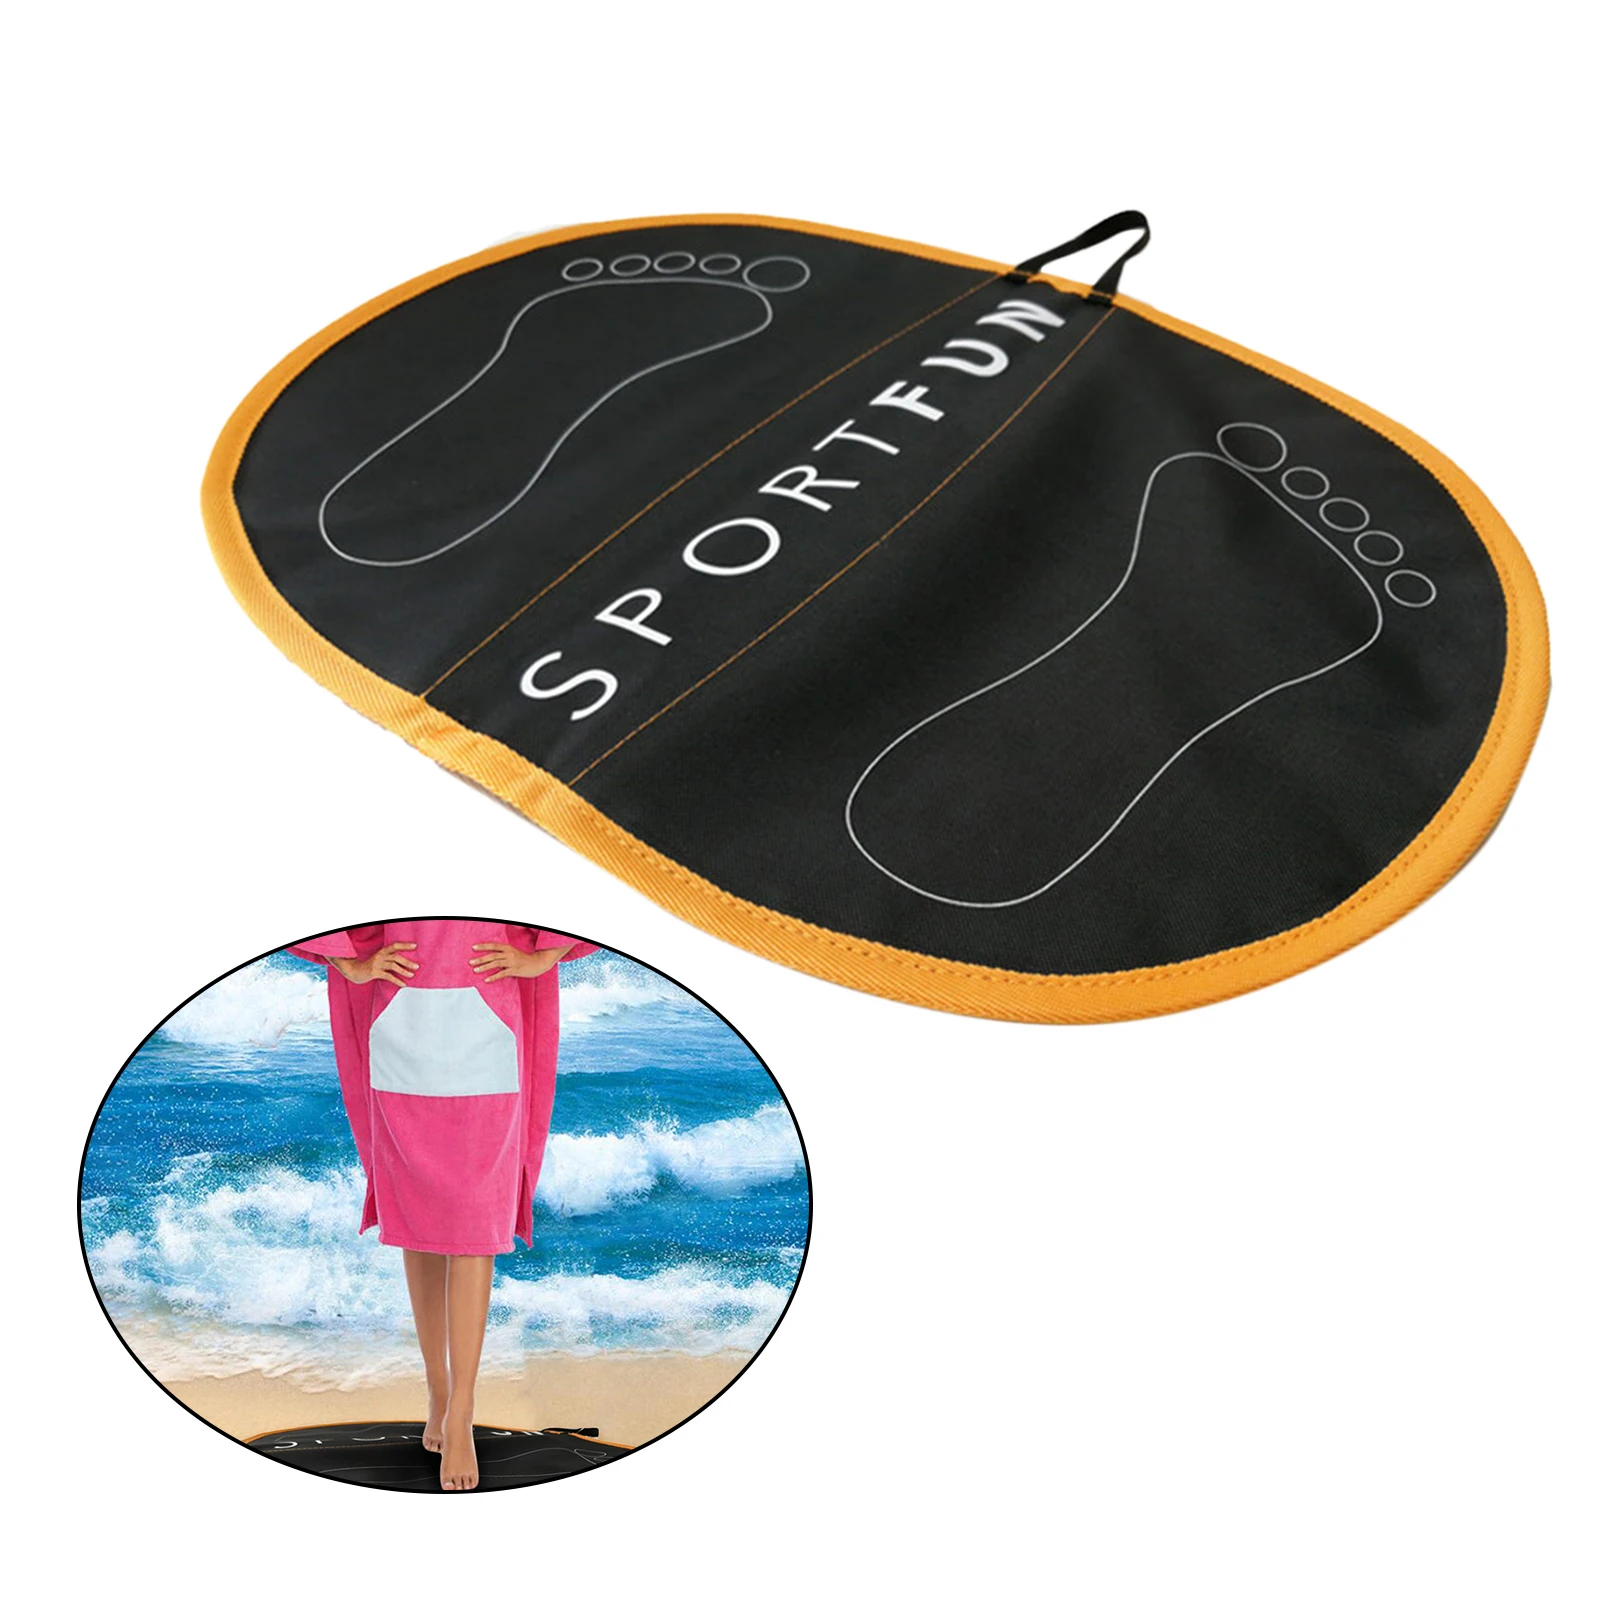 Wetsuit Changing Mat Summer Outdoor Water Sports Changing Clothes Feet Mat